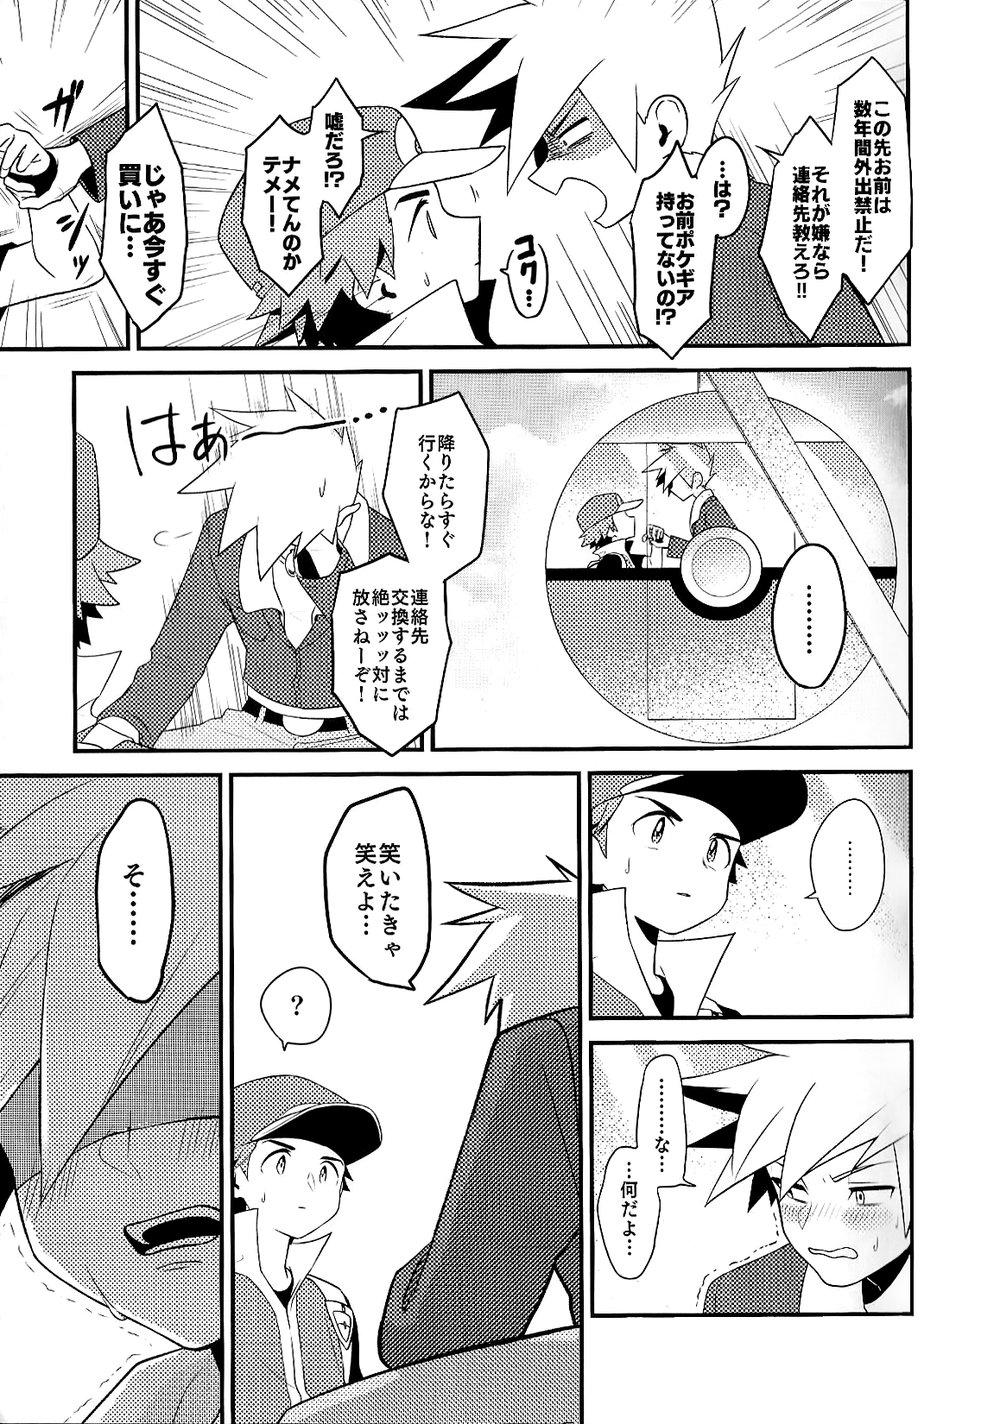 Lolicon Love Me Right - Pokemon Behind - Page 11